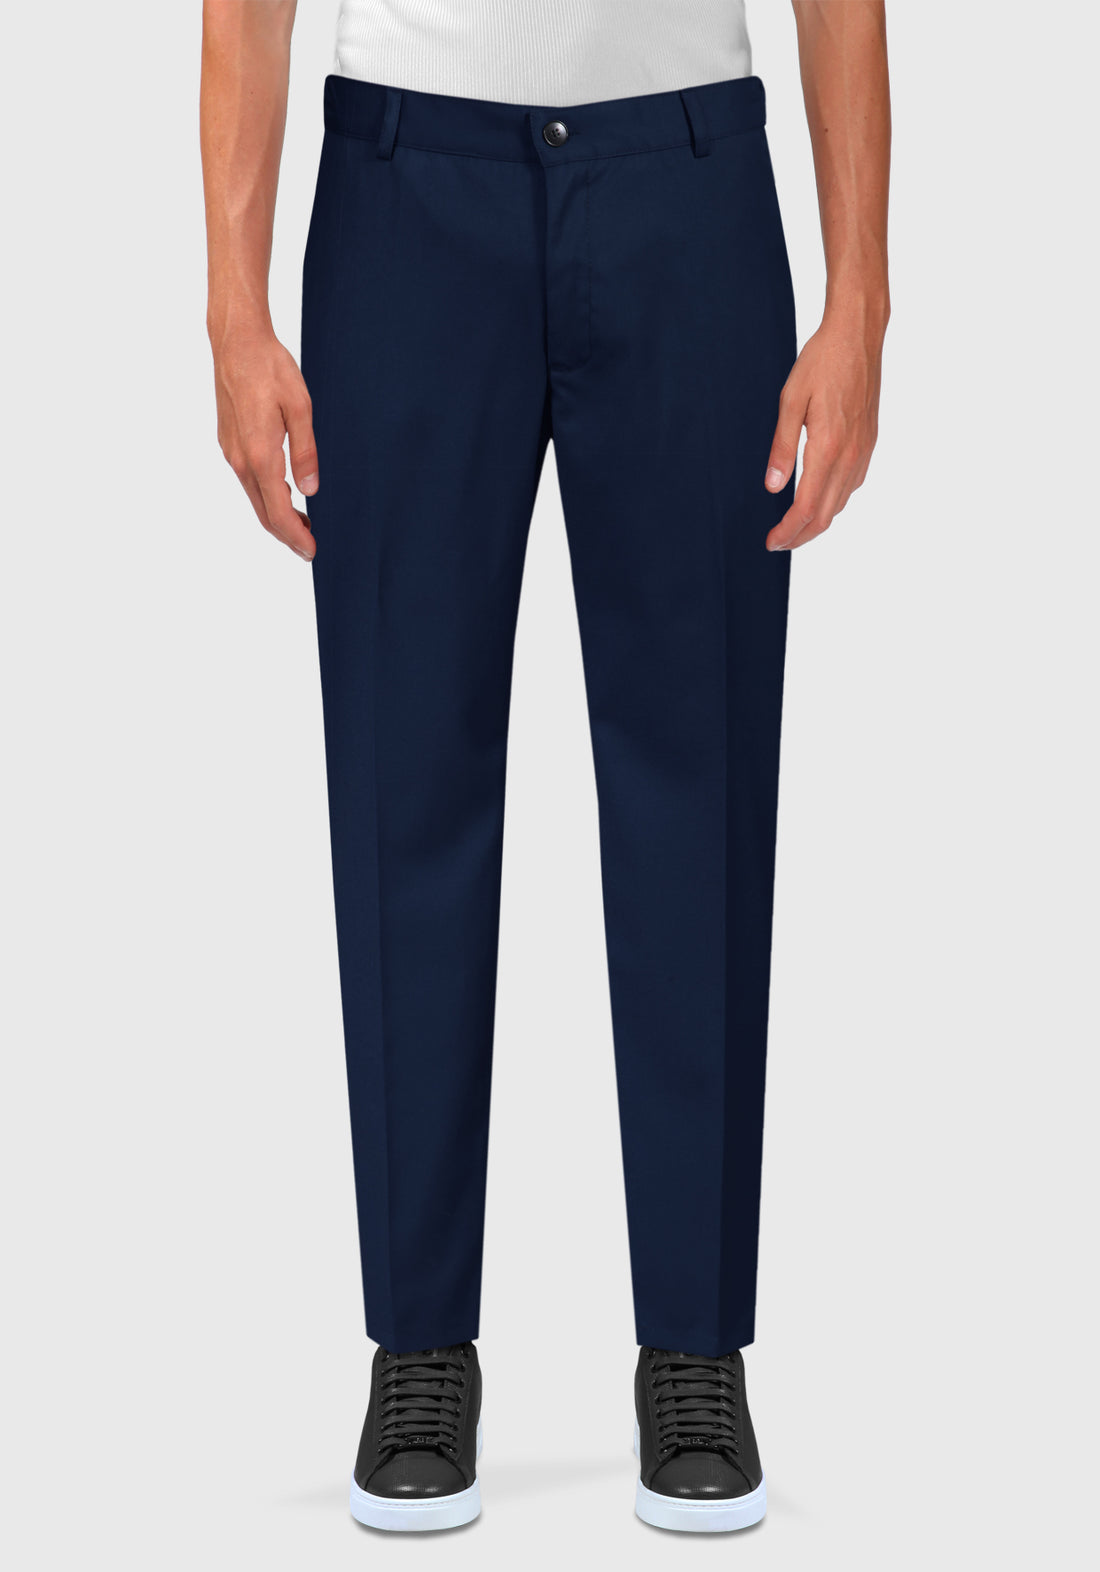 Half-breasted trousers dress with side elastics - Navy Blue